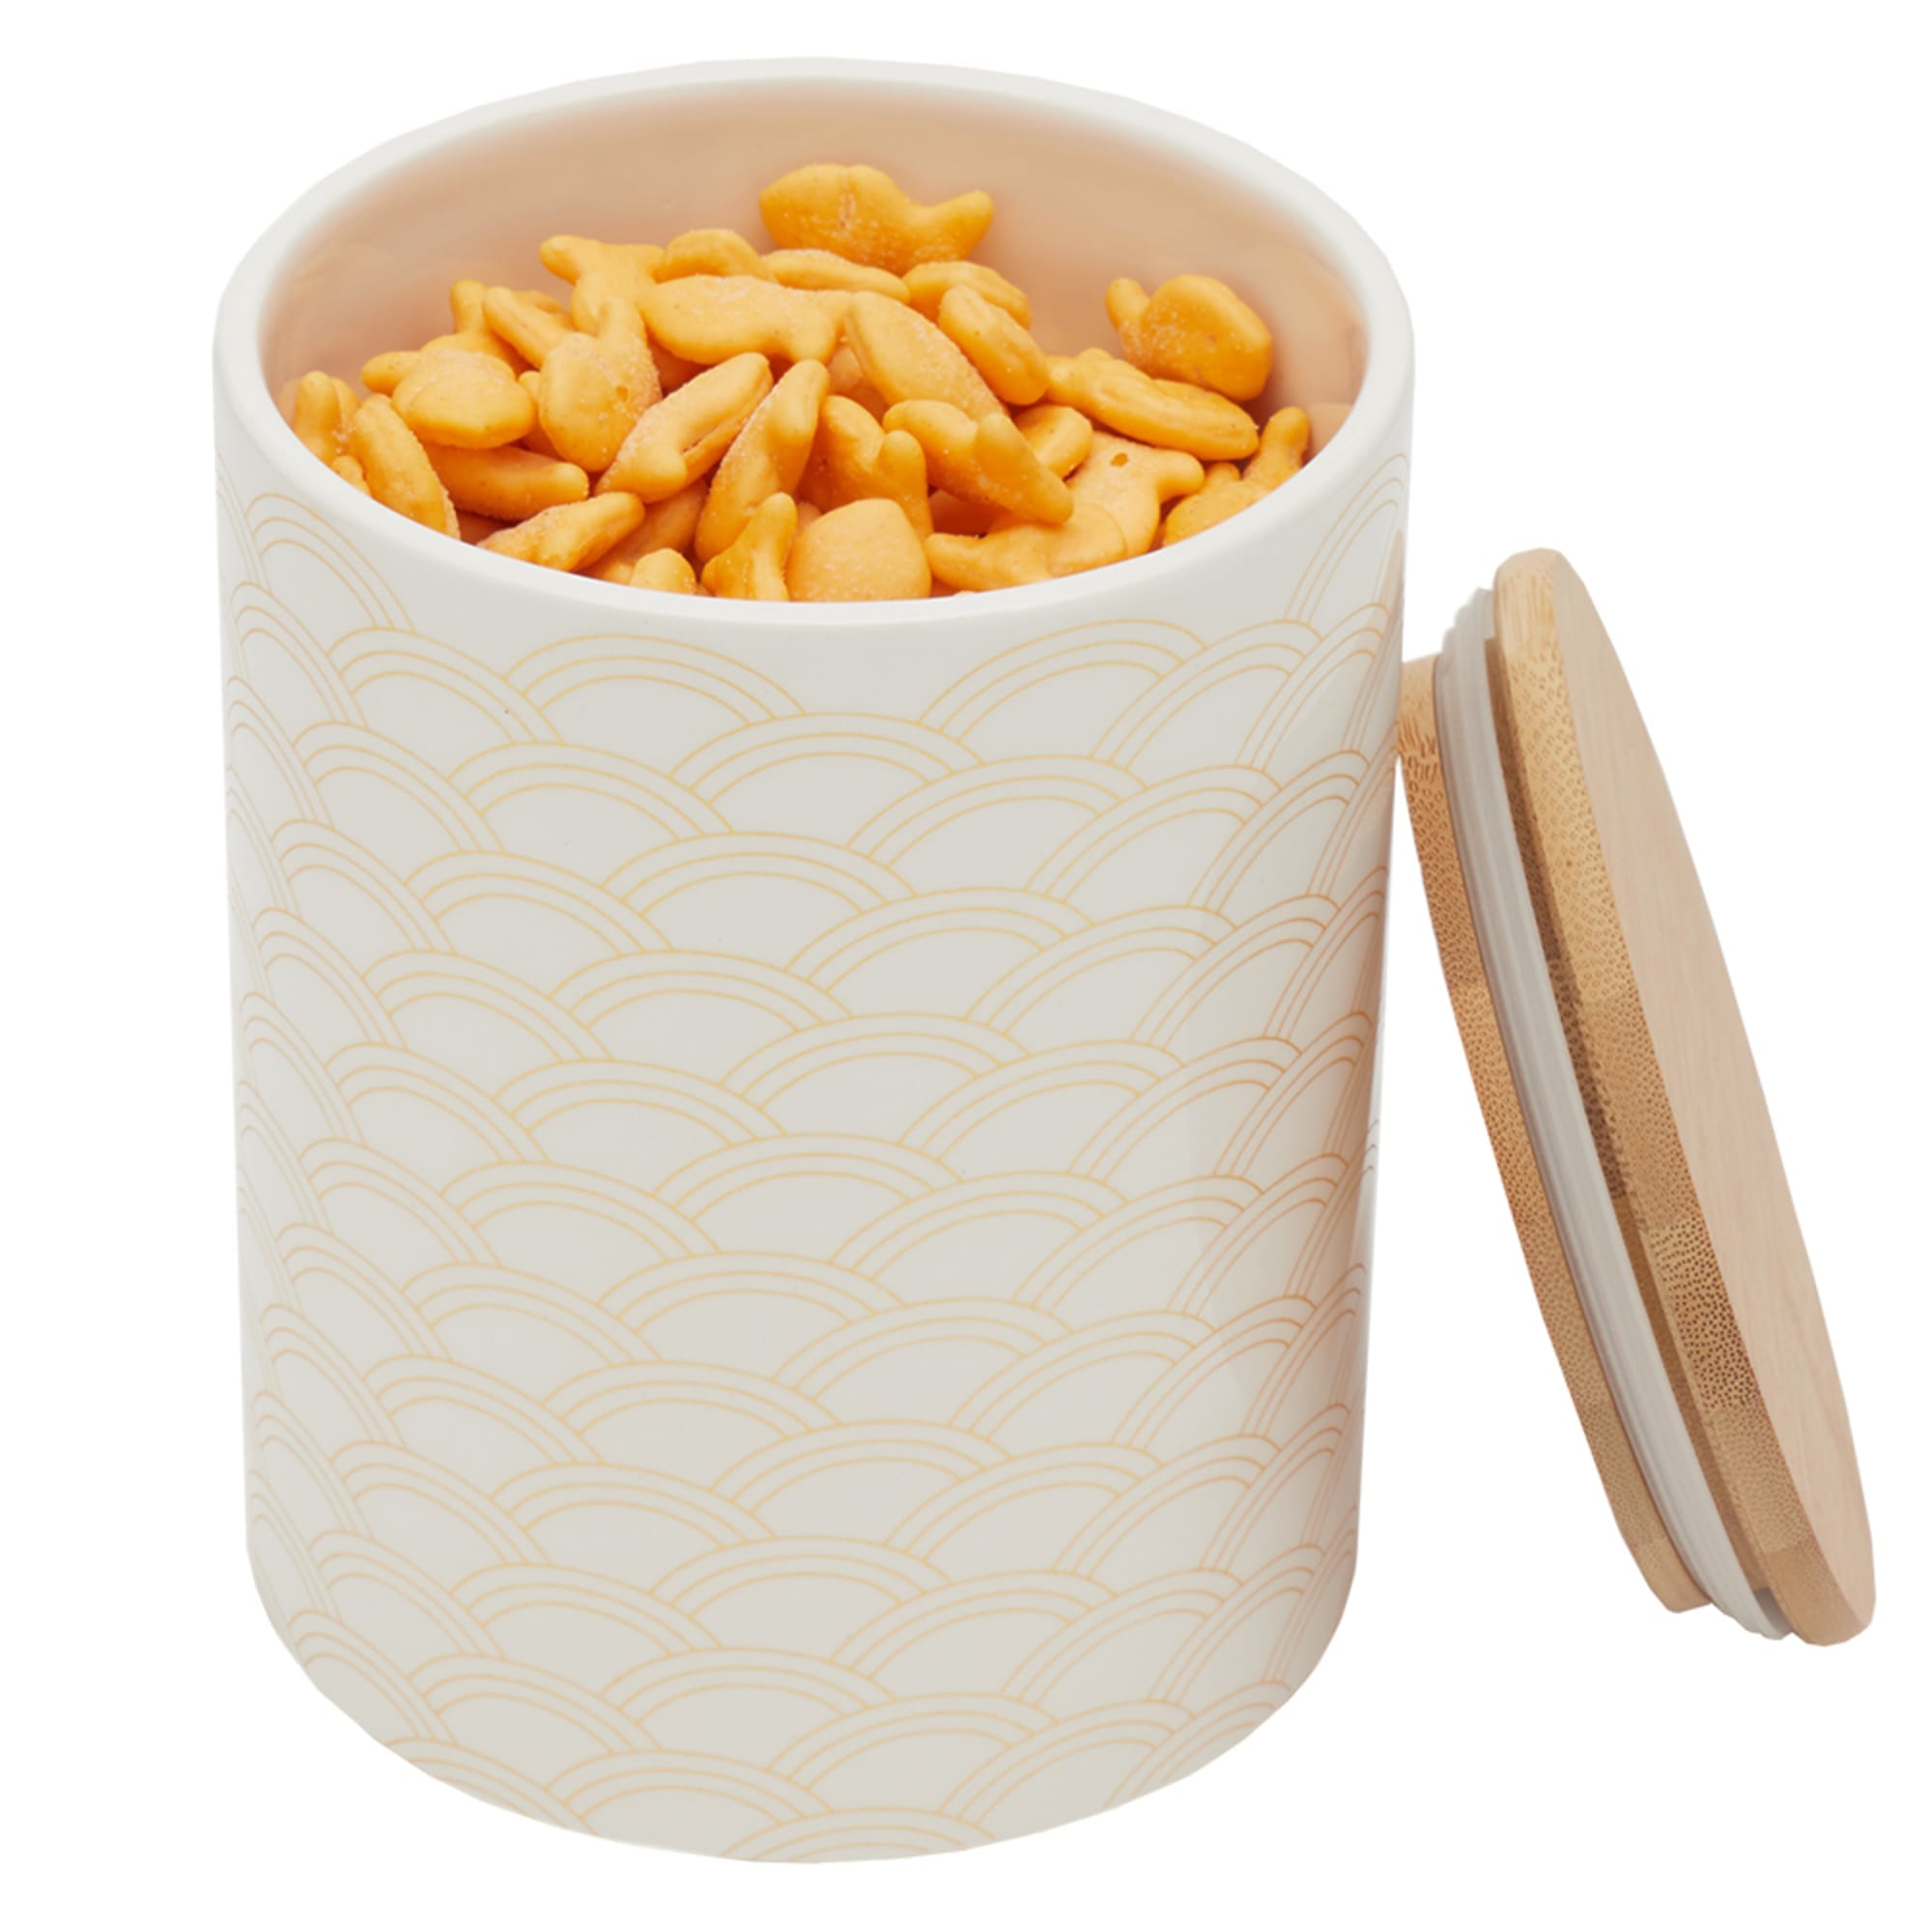 Home Basics Scallop Medium Ceramic Canister with Bamboo Top $6.00 EACH, CASE PACK OF 12